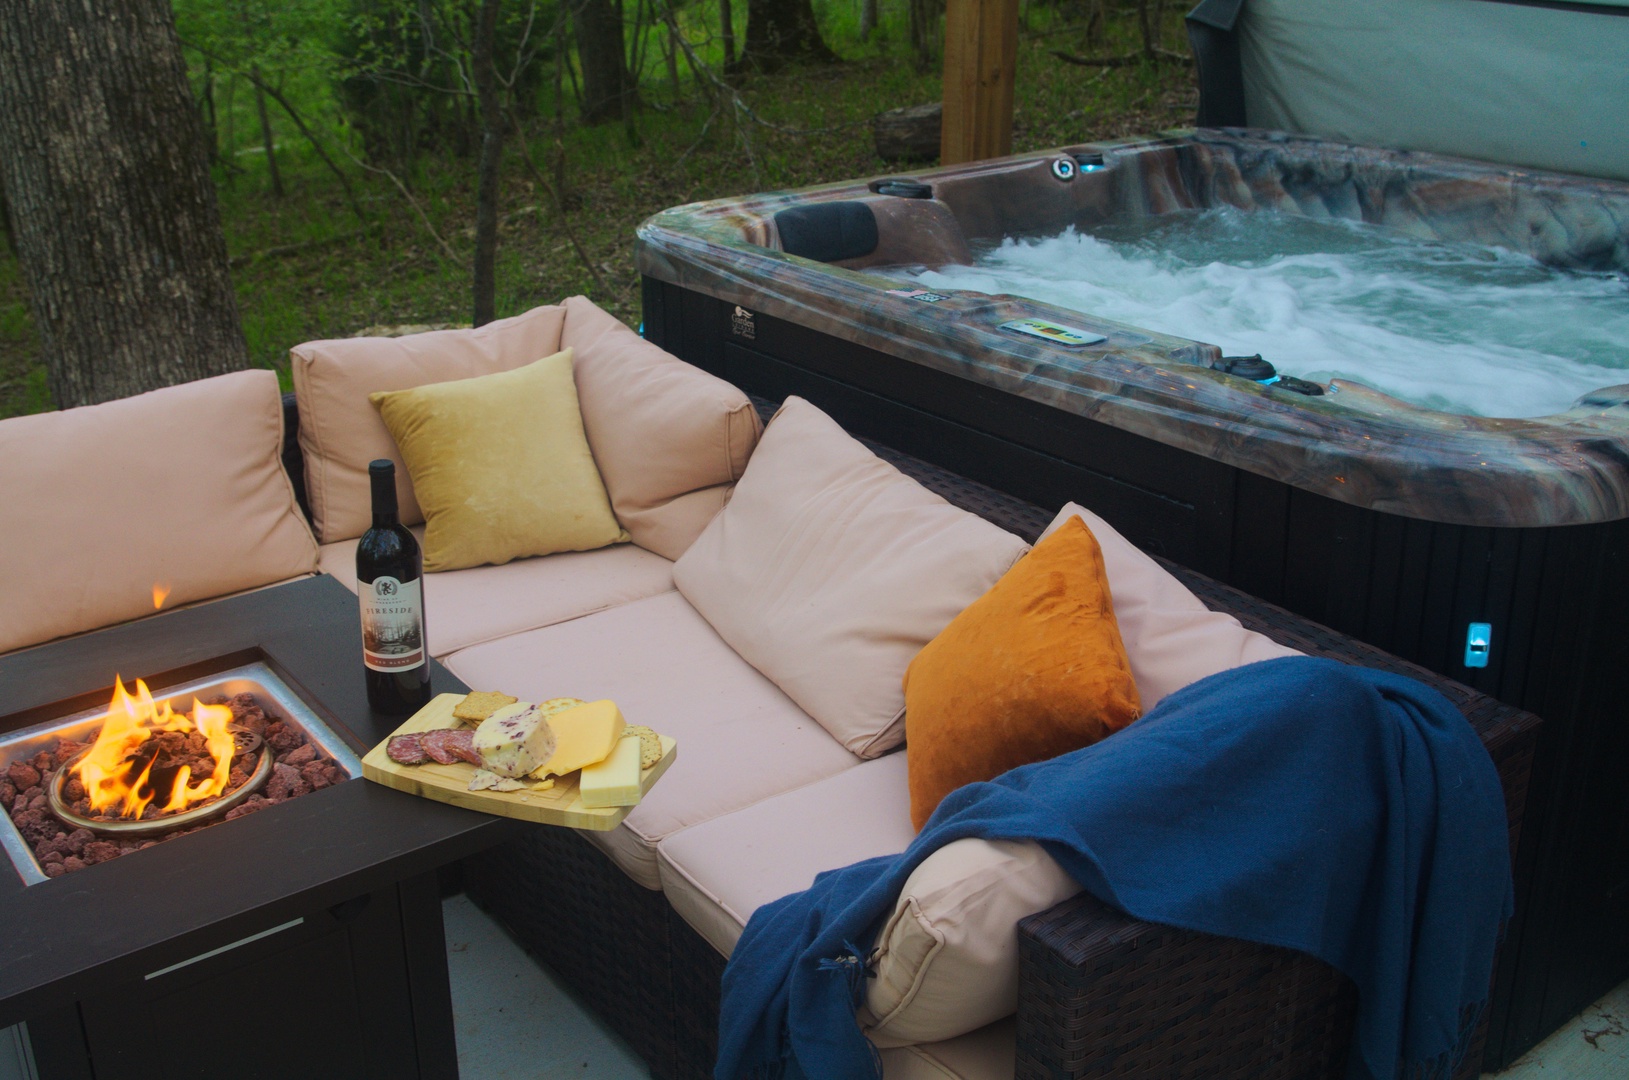 Unwind in the hot tub or cozy up in front of the fire table as you take in the pleasant forest views at Restful Ridge . “Great experience!” - Jordan